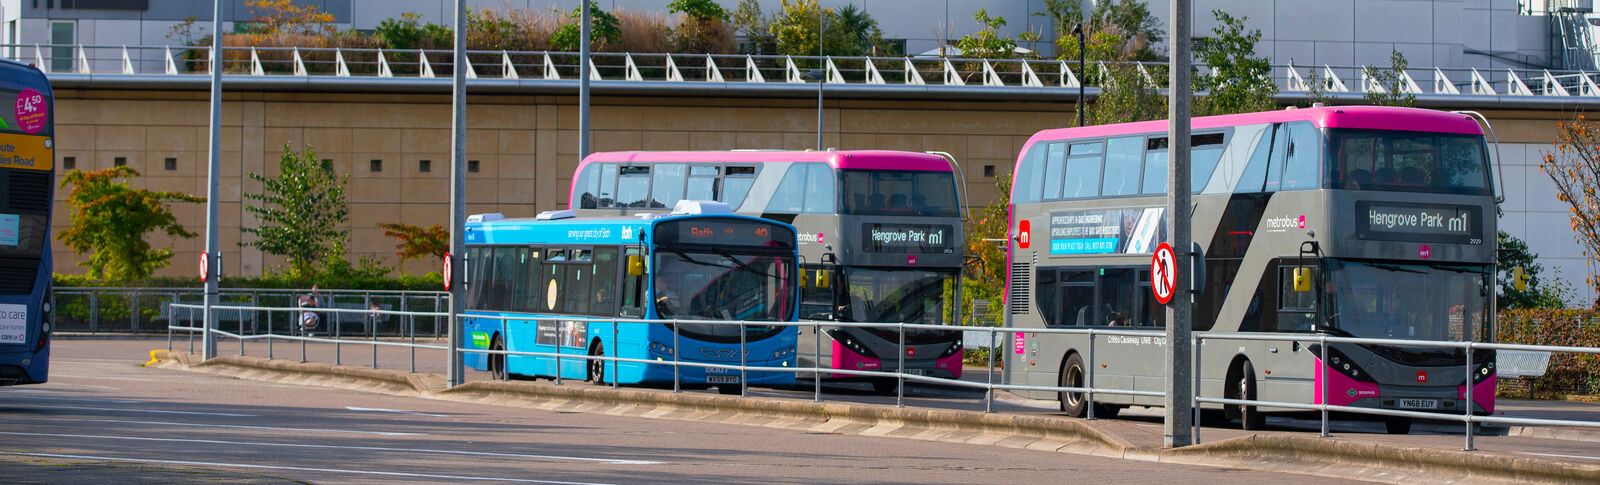 Buses at Cribbs Causeway - The Mall bus station